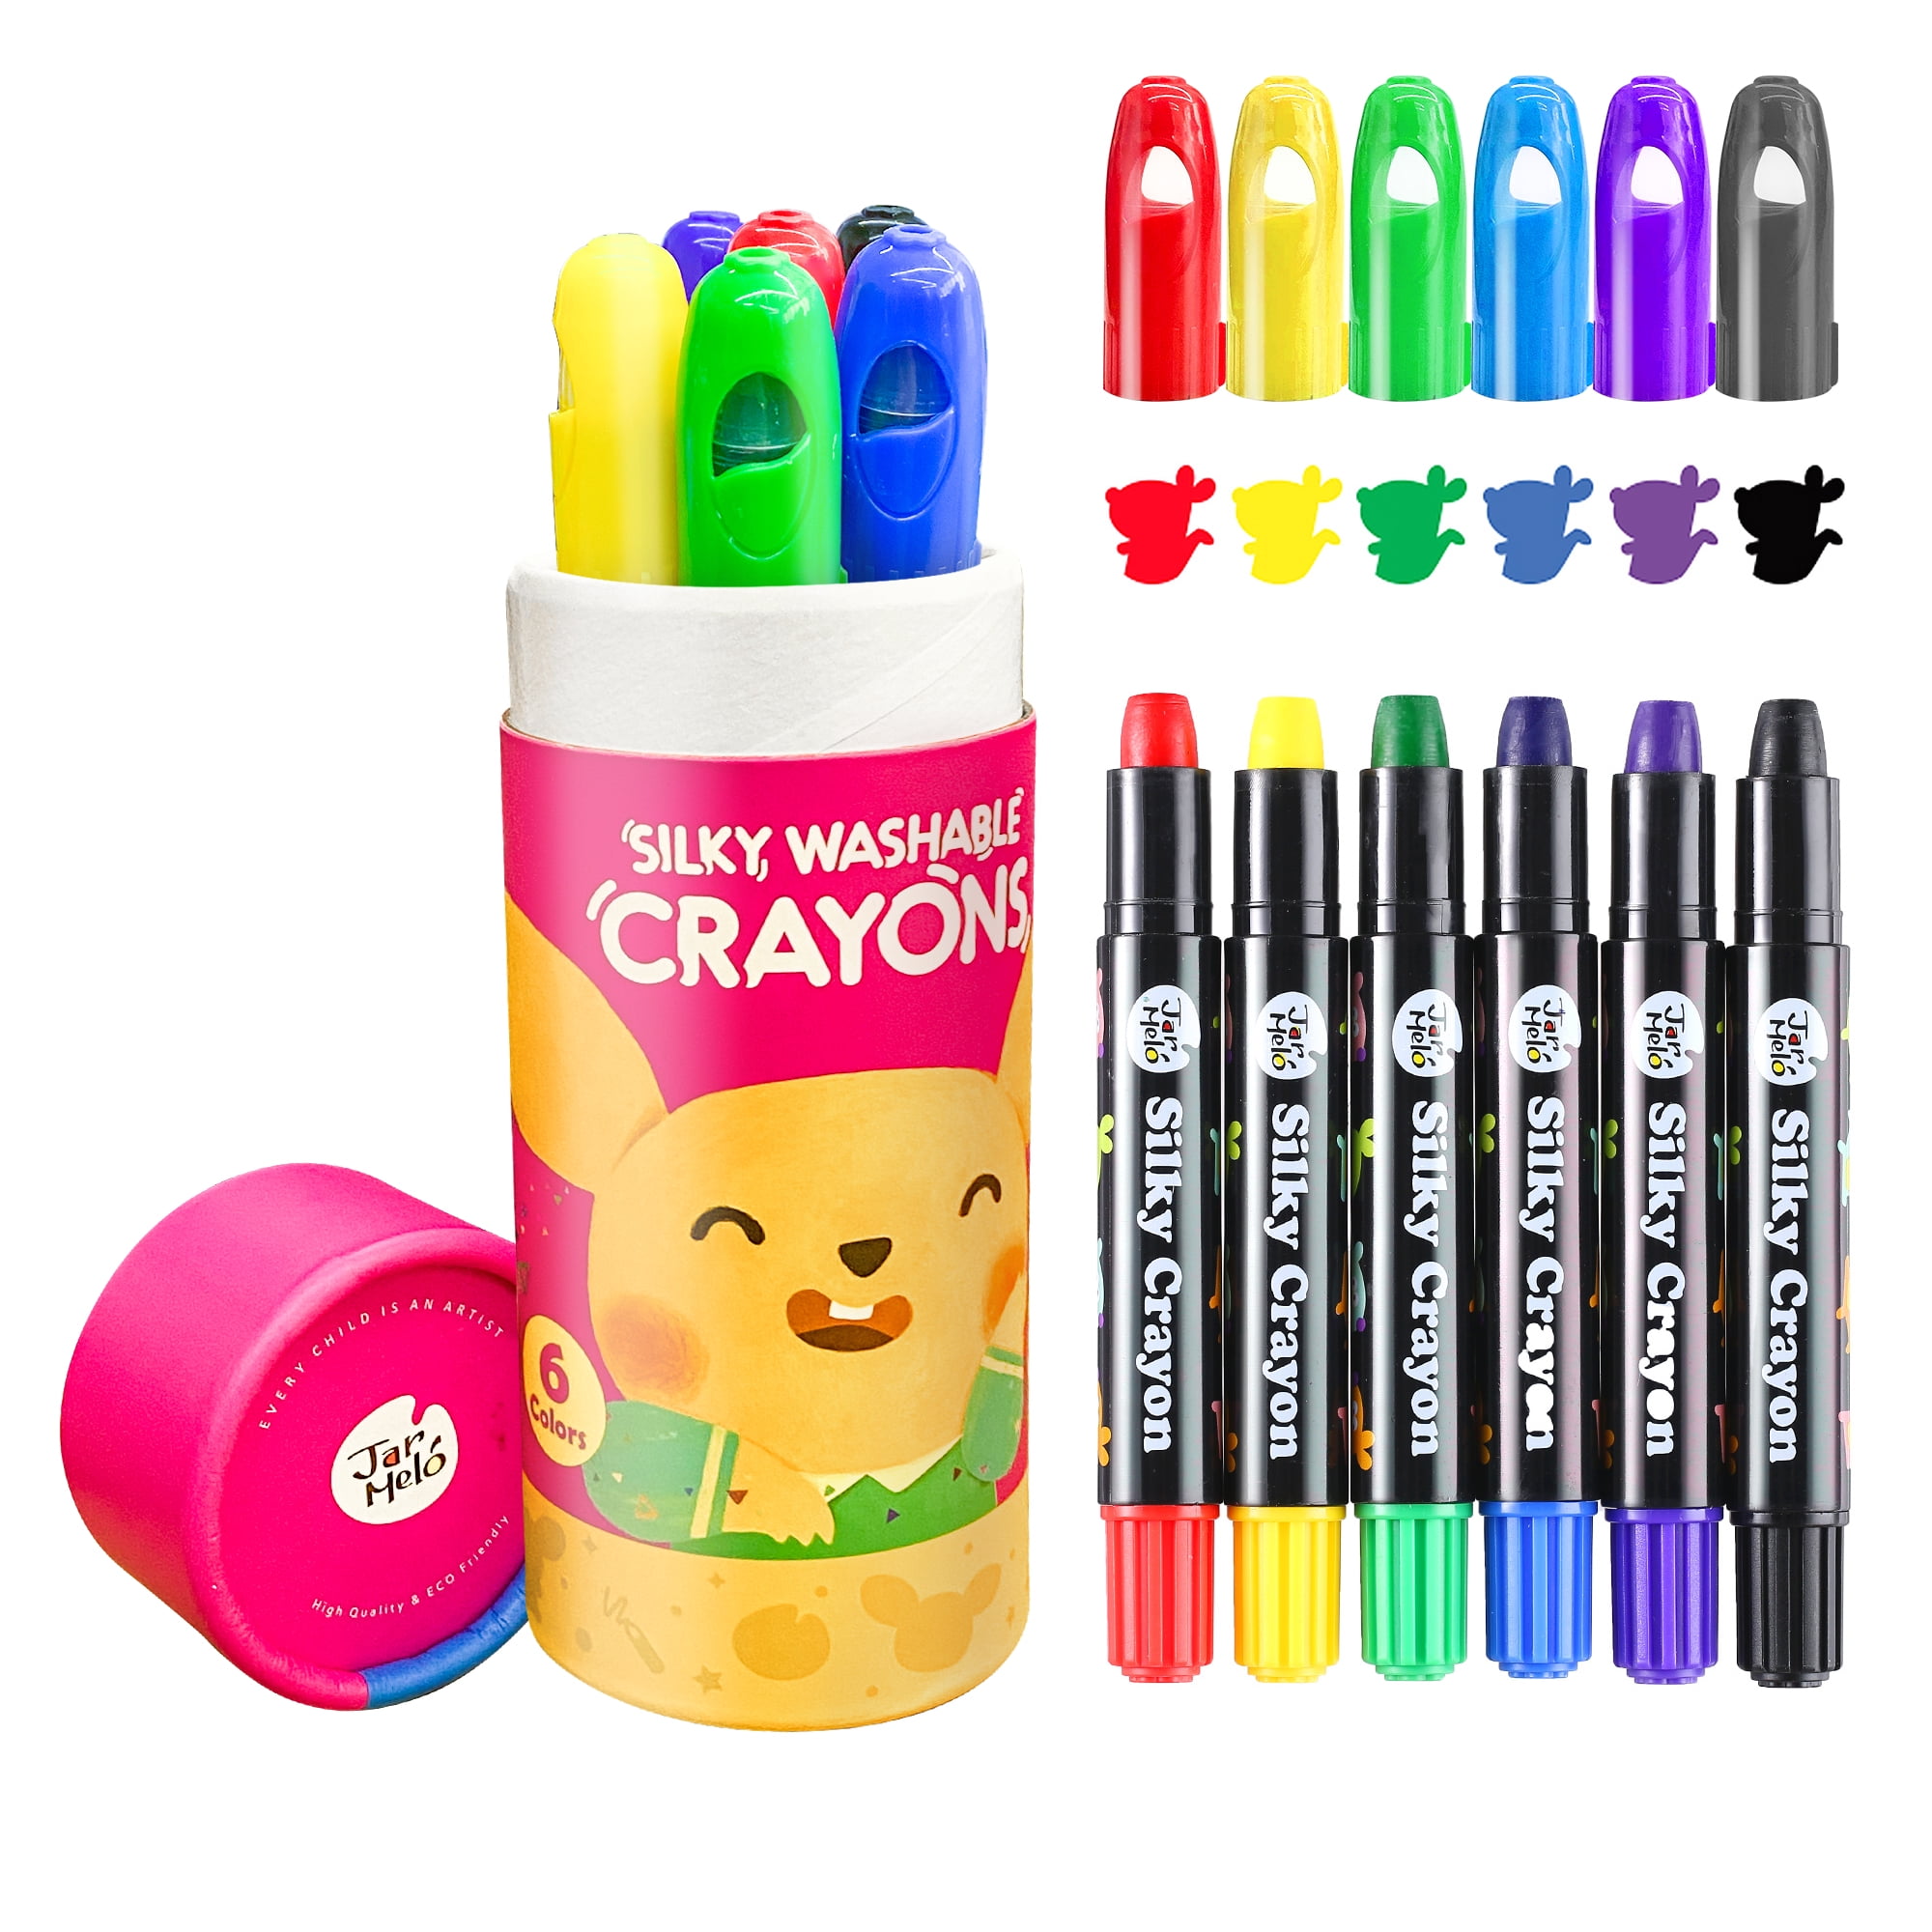  MASSRT Jumbo Crayons for Toddlers, 18 Colors Mess Free  Unbreakable Crayon Gifts, Easy to Hold Washable Crayons for Kids, Safe  Coloring Gifts for Babies and Children : Toys & Games